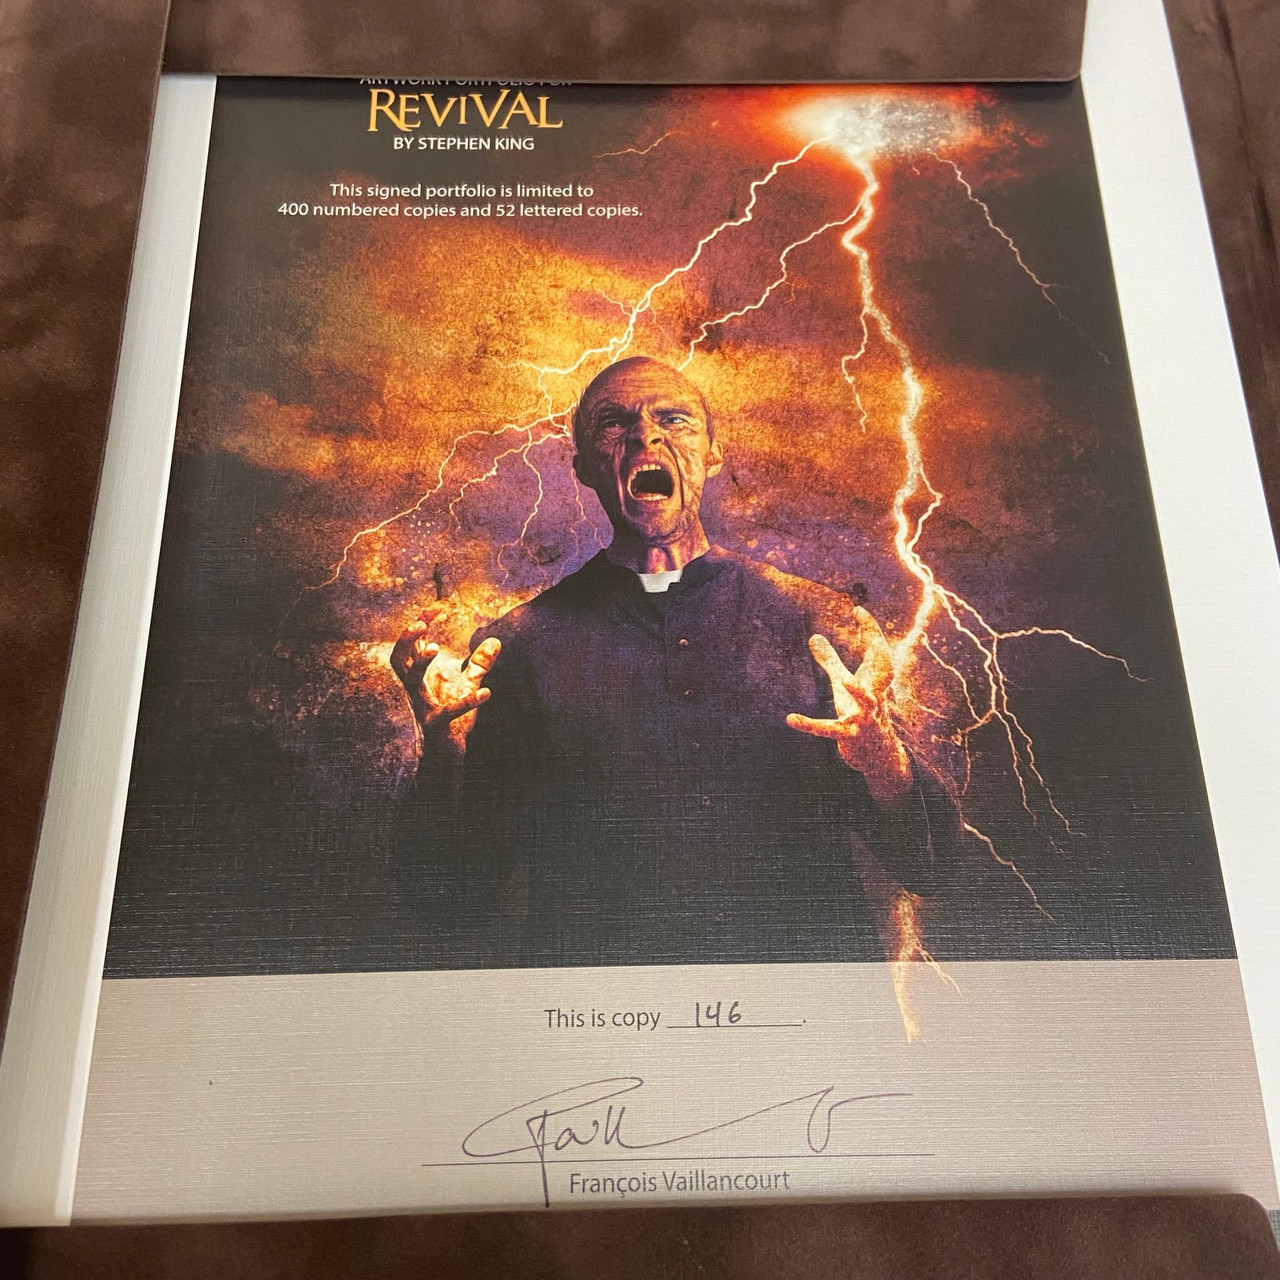 Stephen King "REVIVAL" Signed Limited Art Portfolio No. 146 of 400 (Signed by François Vaillancourt) Traycased [Very Fine]